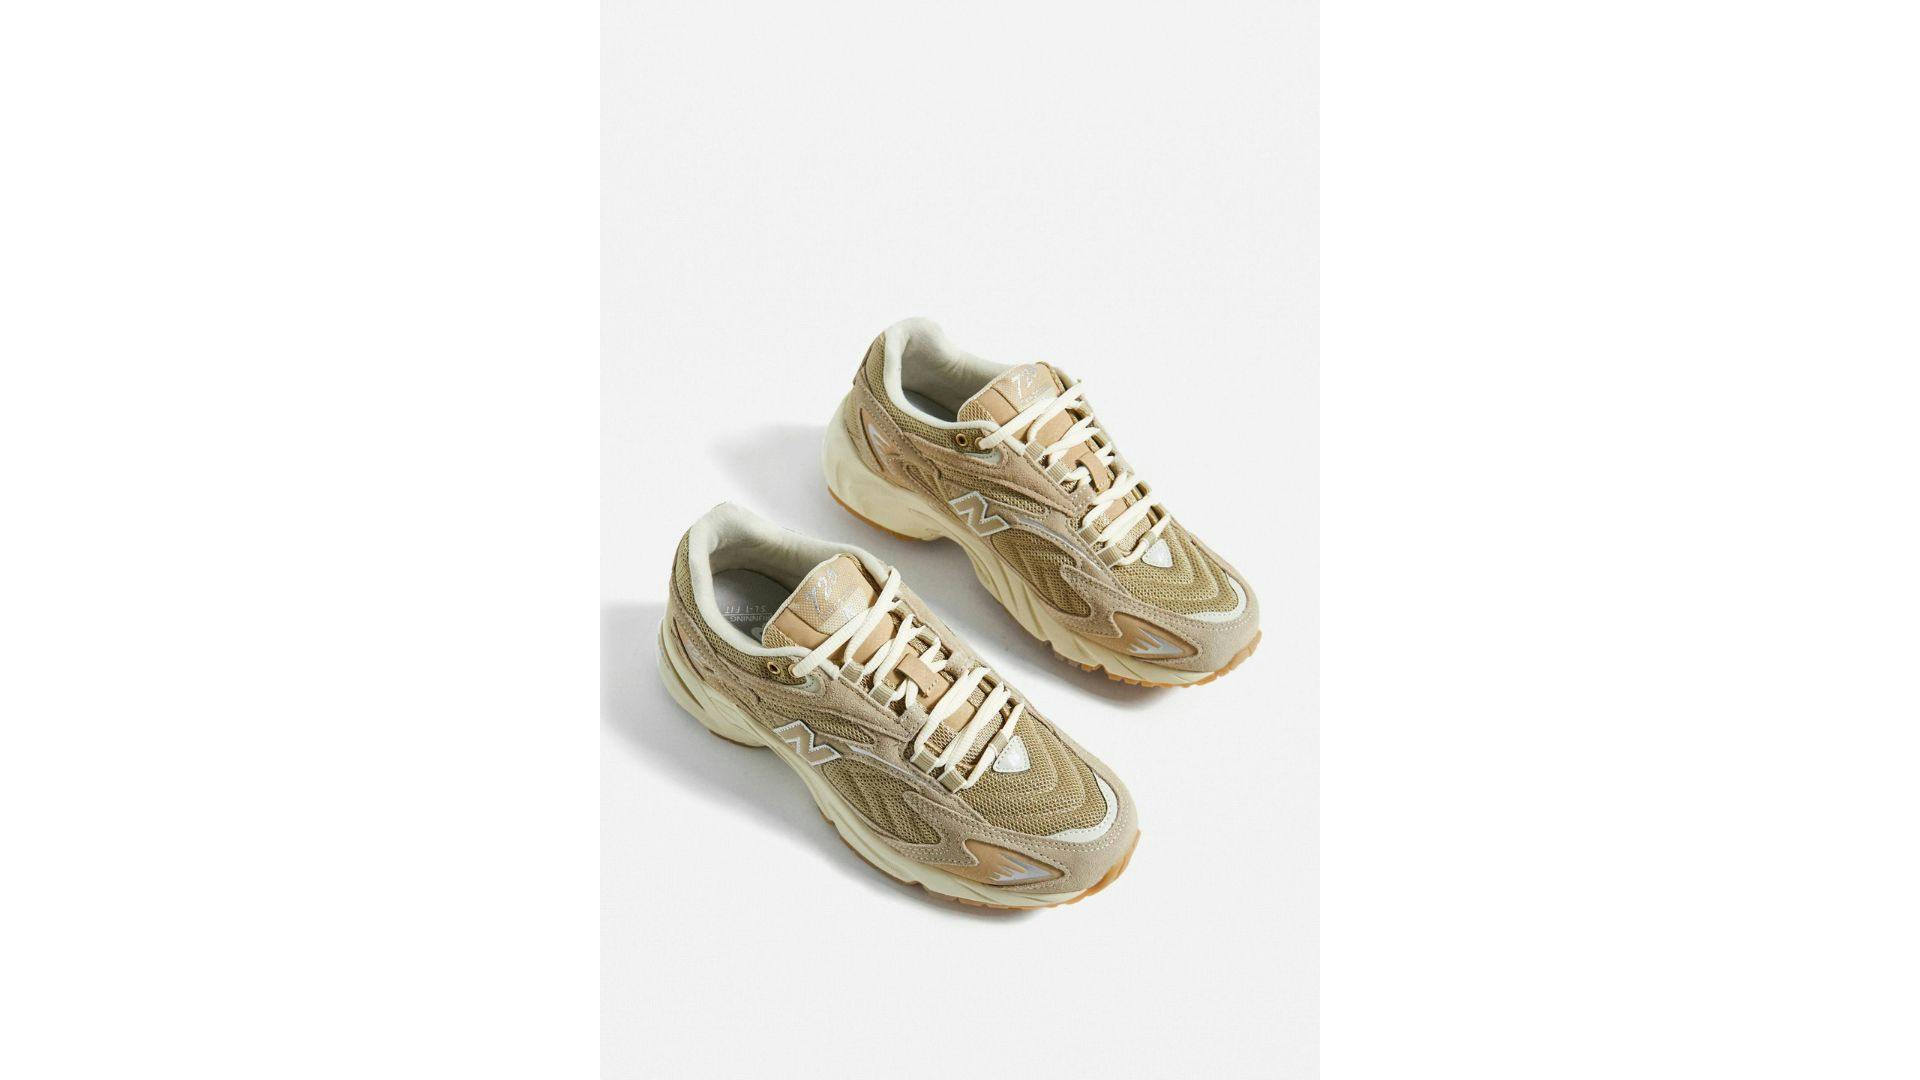 One of the best seller of Urban Outfitters is New Balance Khaki 725